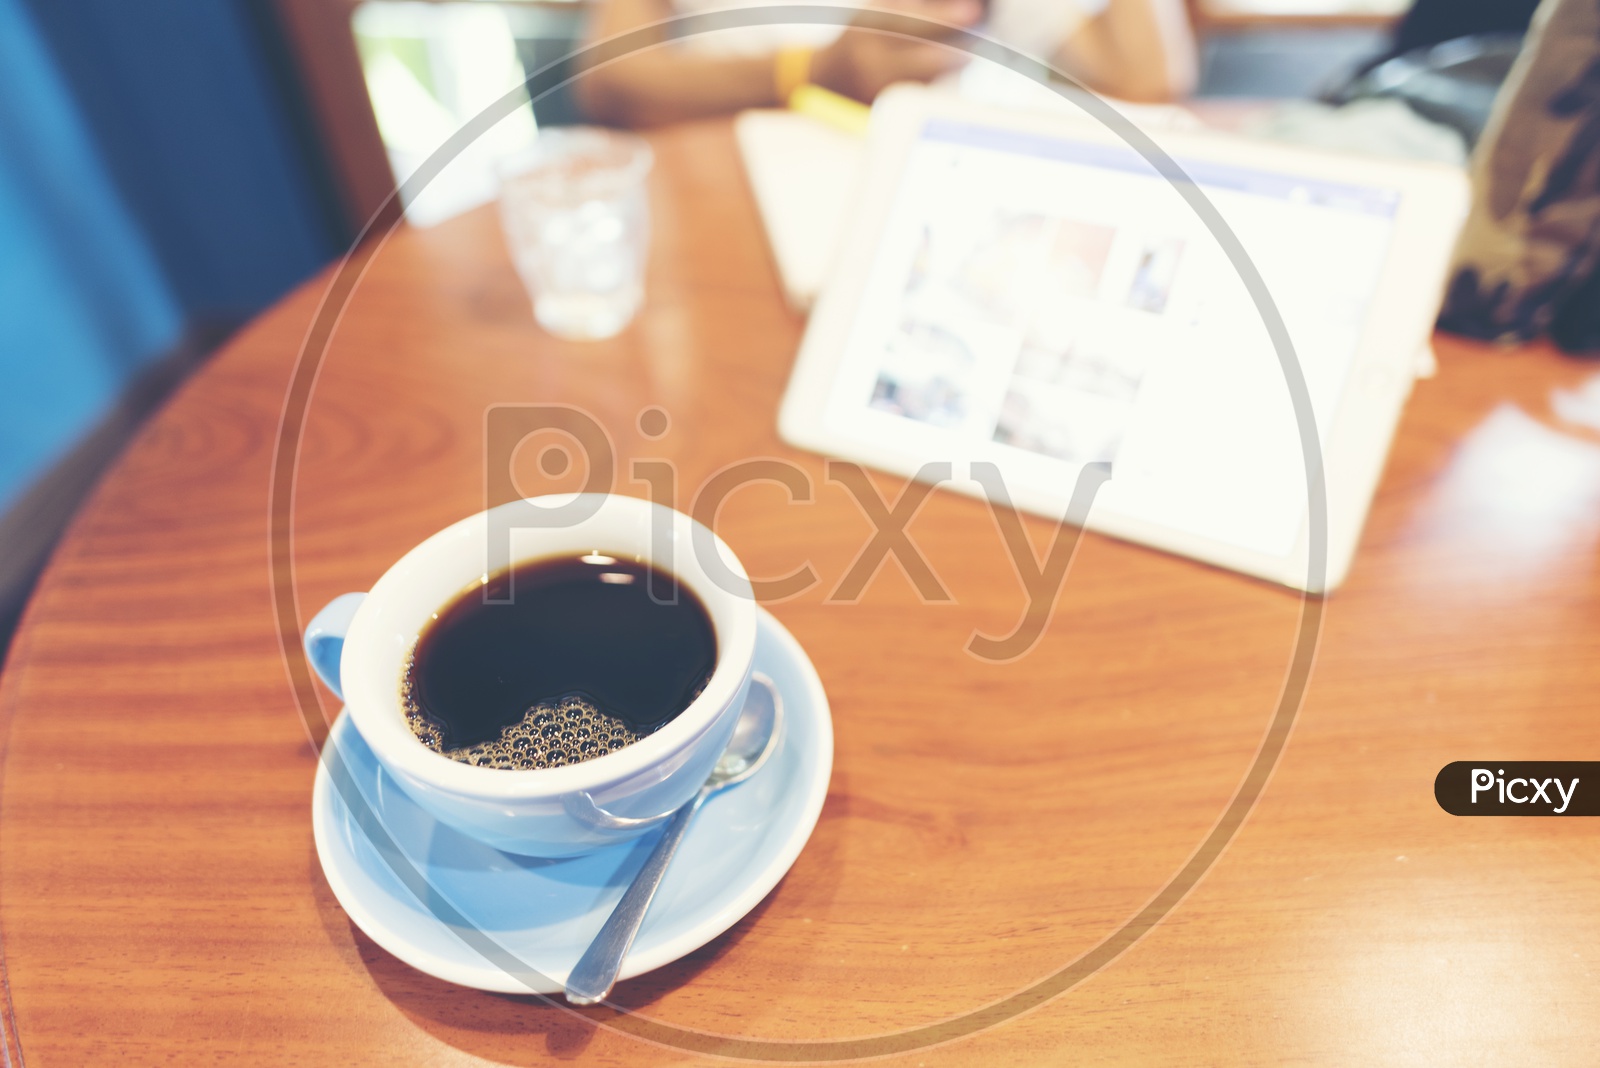 Black americano coffee in ceramic white cup on a wooden table